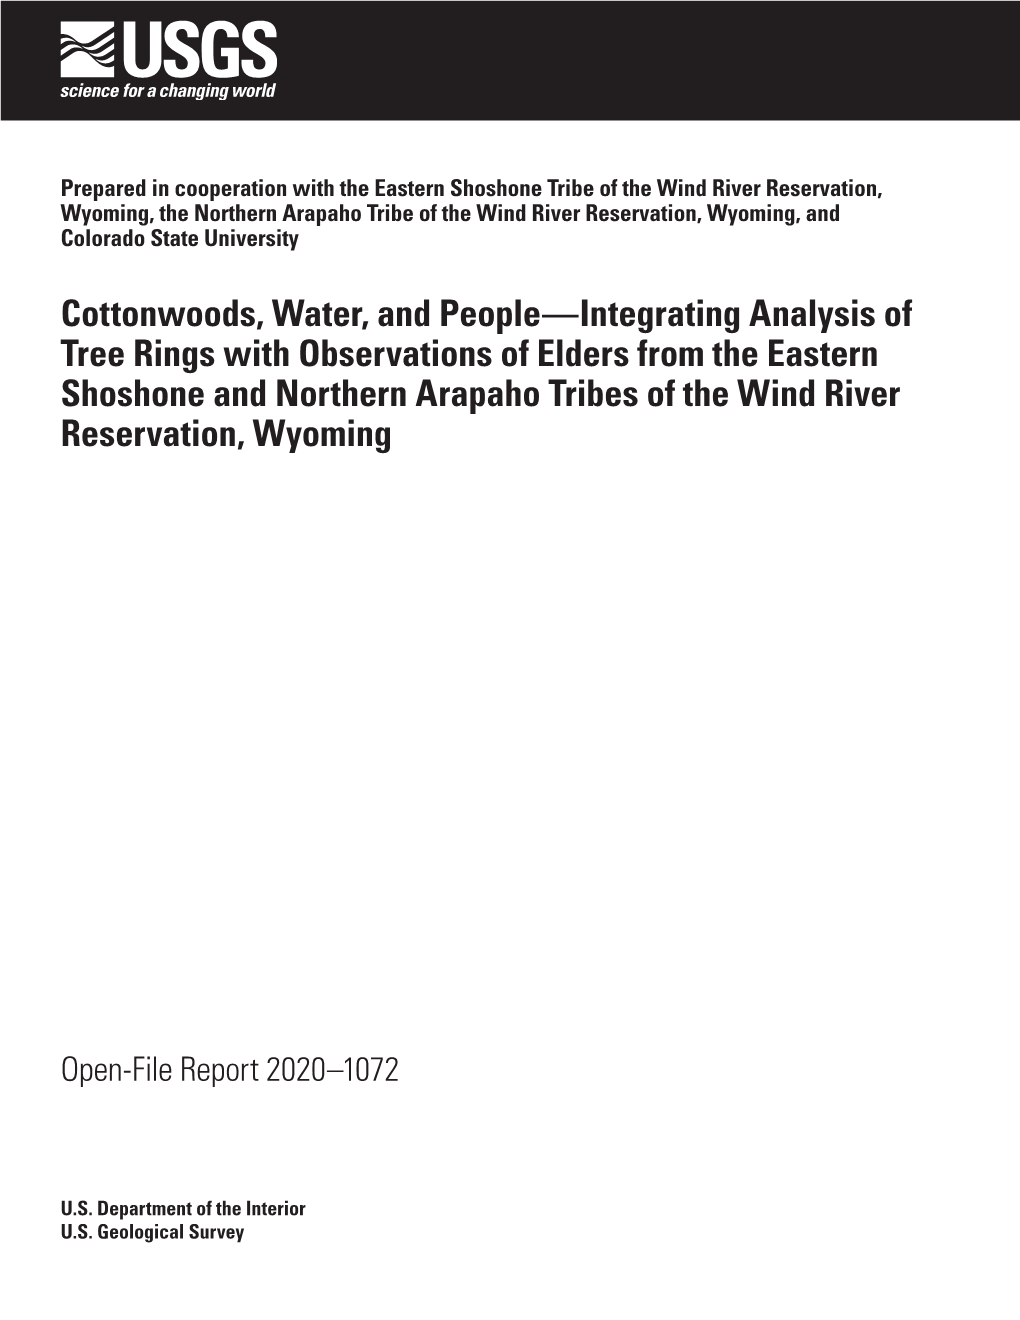 Cottonwoods, Water, and People—Integrating Analysis of Tree Rings with Observations of Elders from the Eastern Shoshone and No